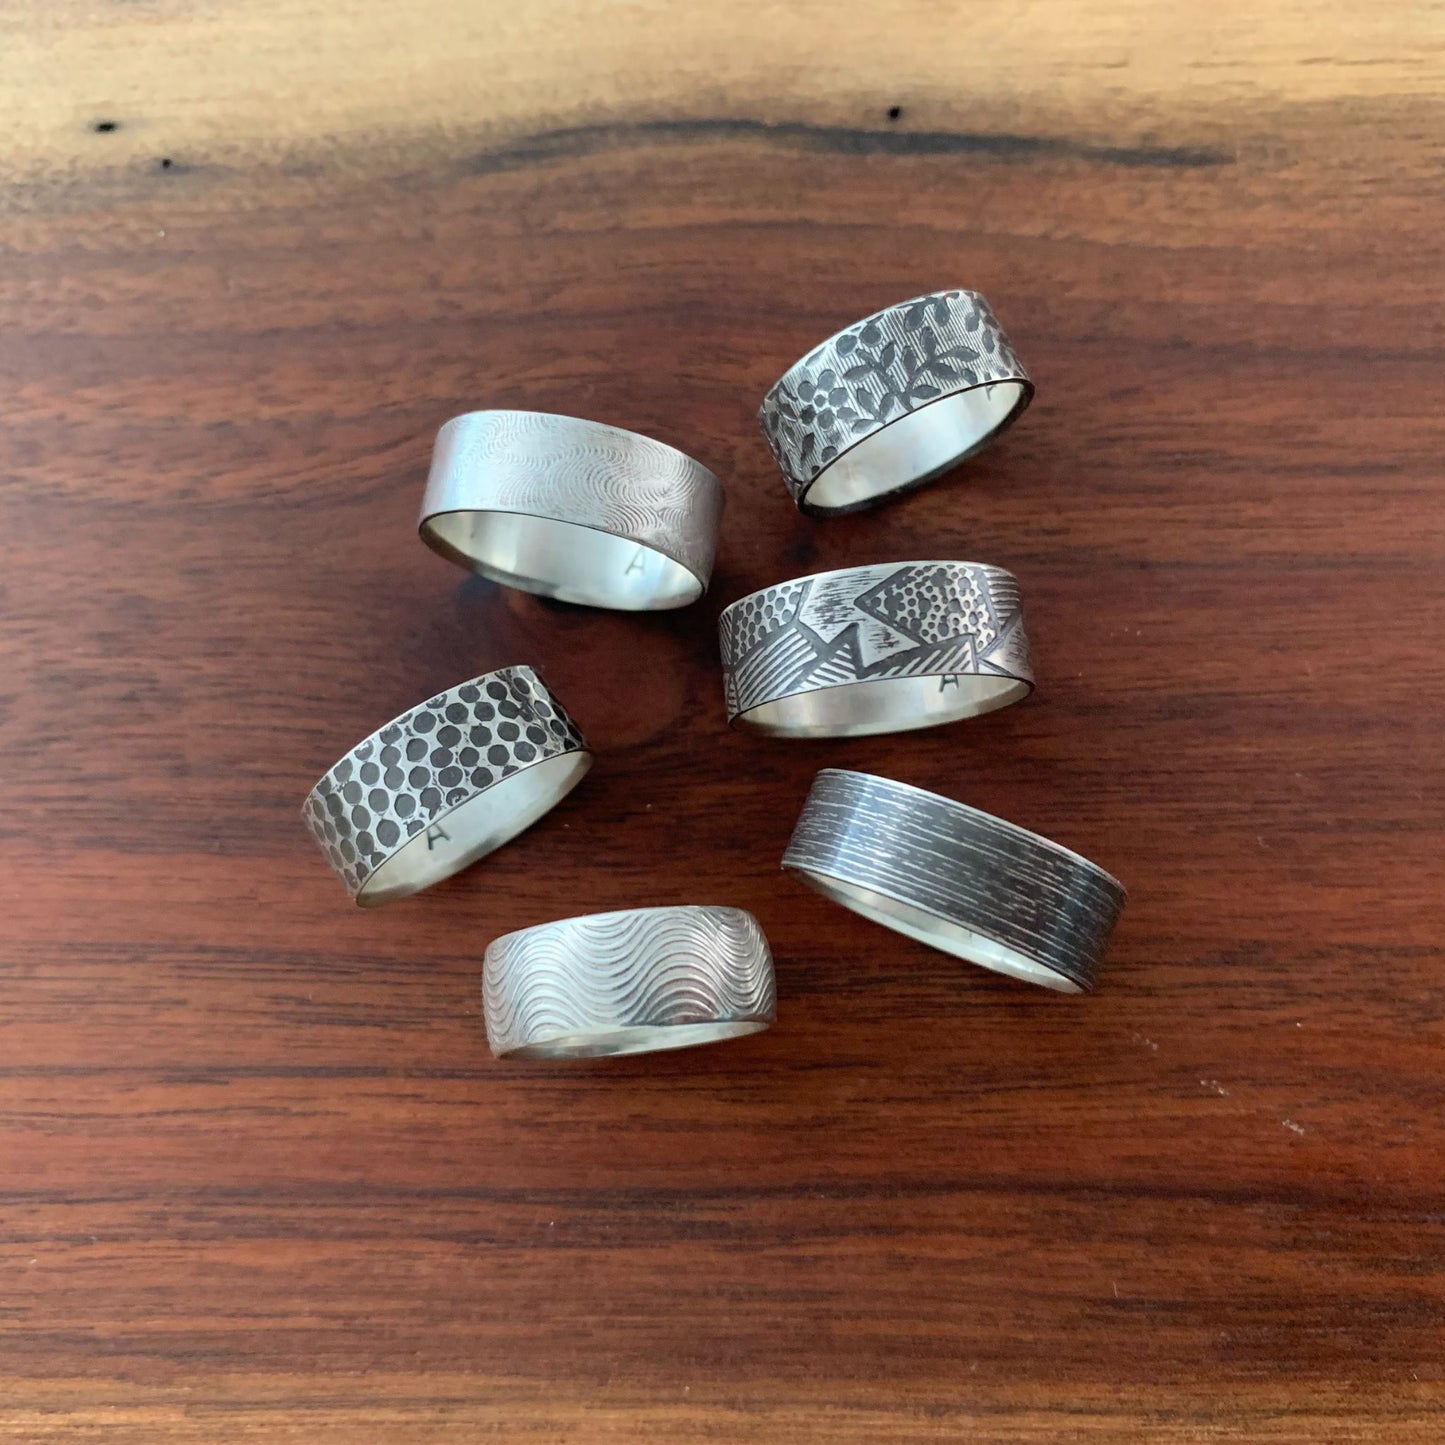 Student ring samples from Metals 1 class